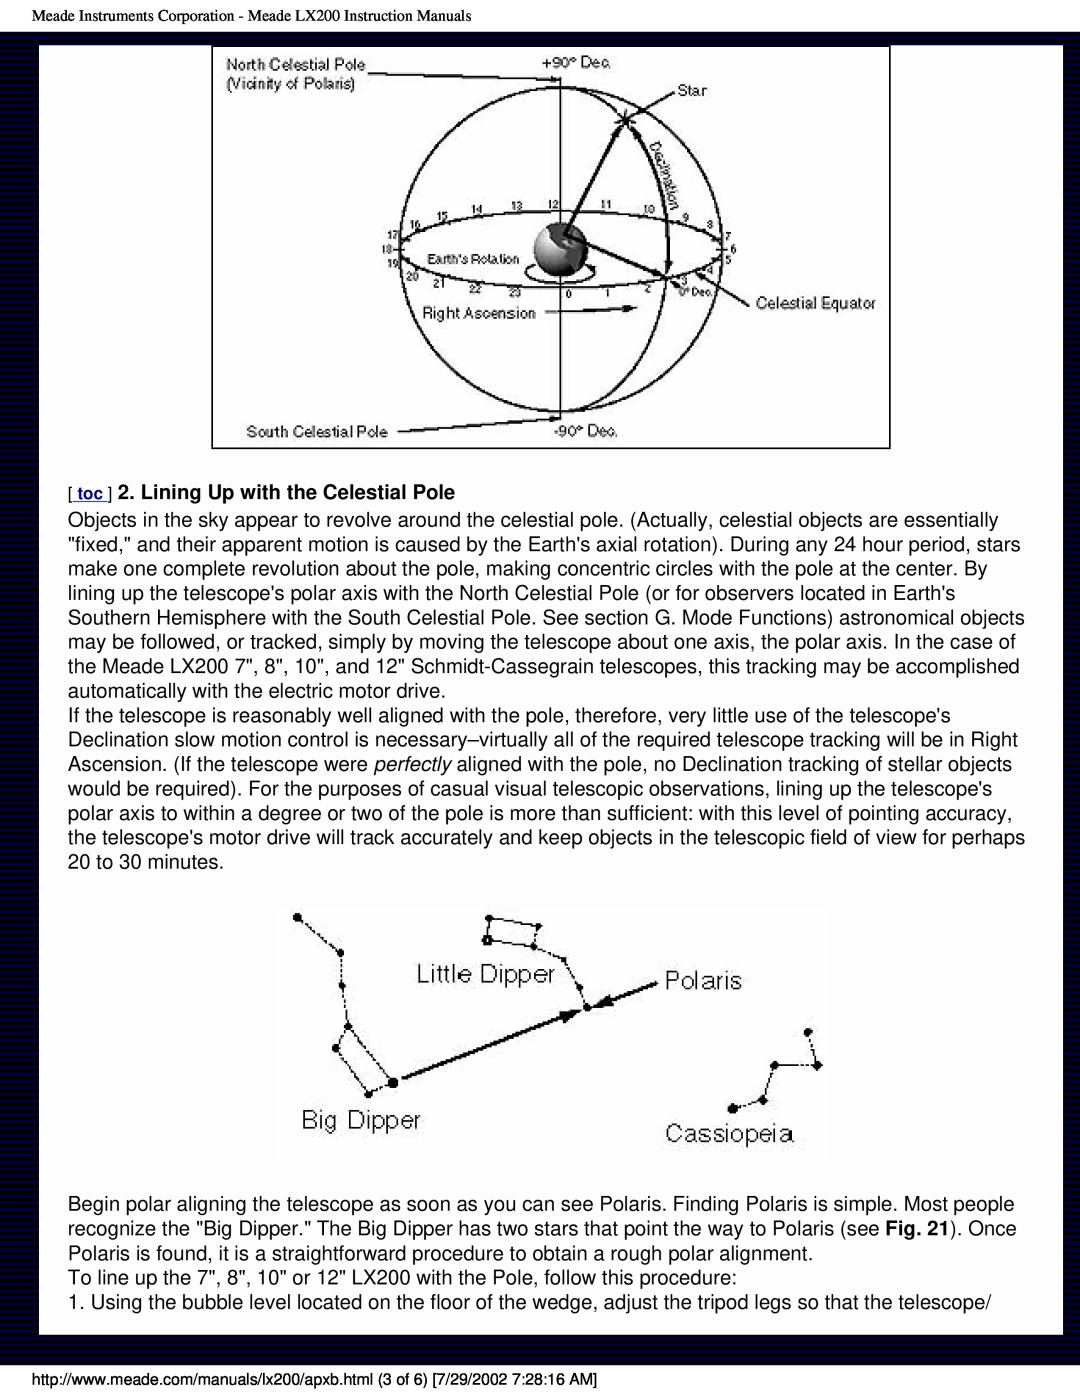 Meade LX200 instruction manual toc 2. Lining Up with the Celestial Pole 